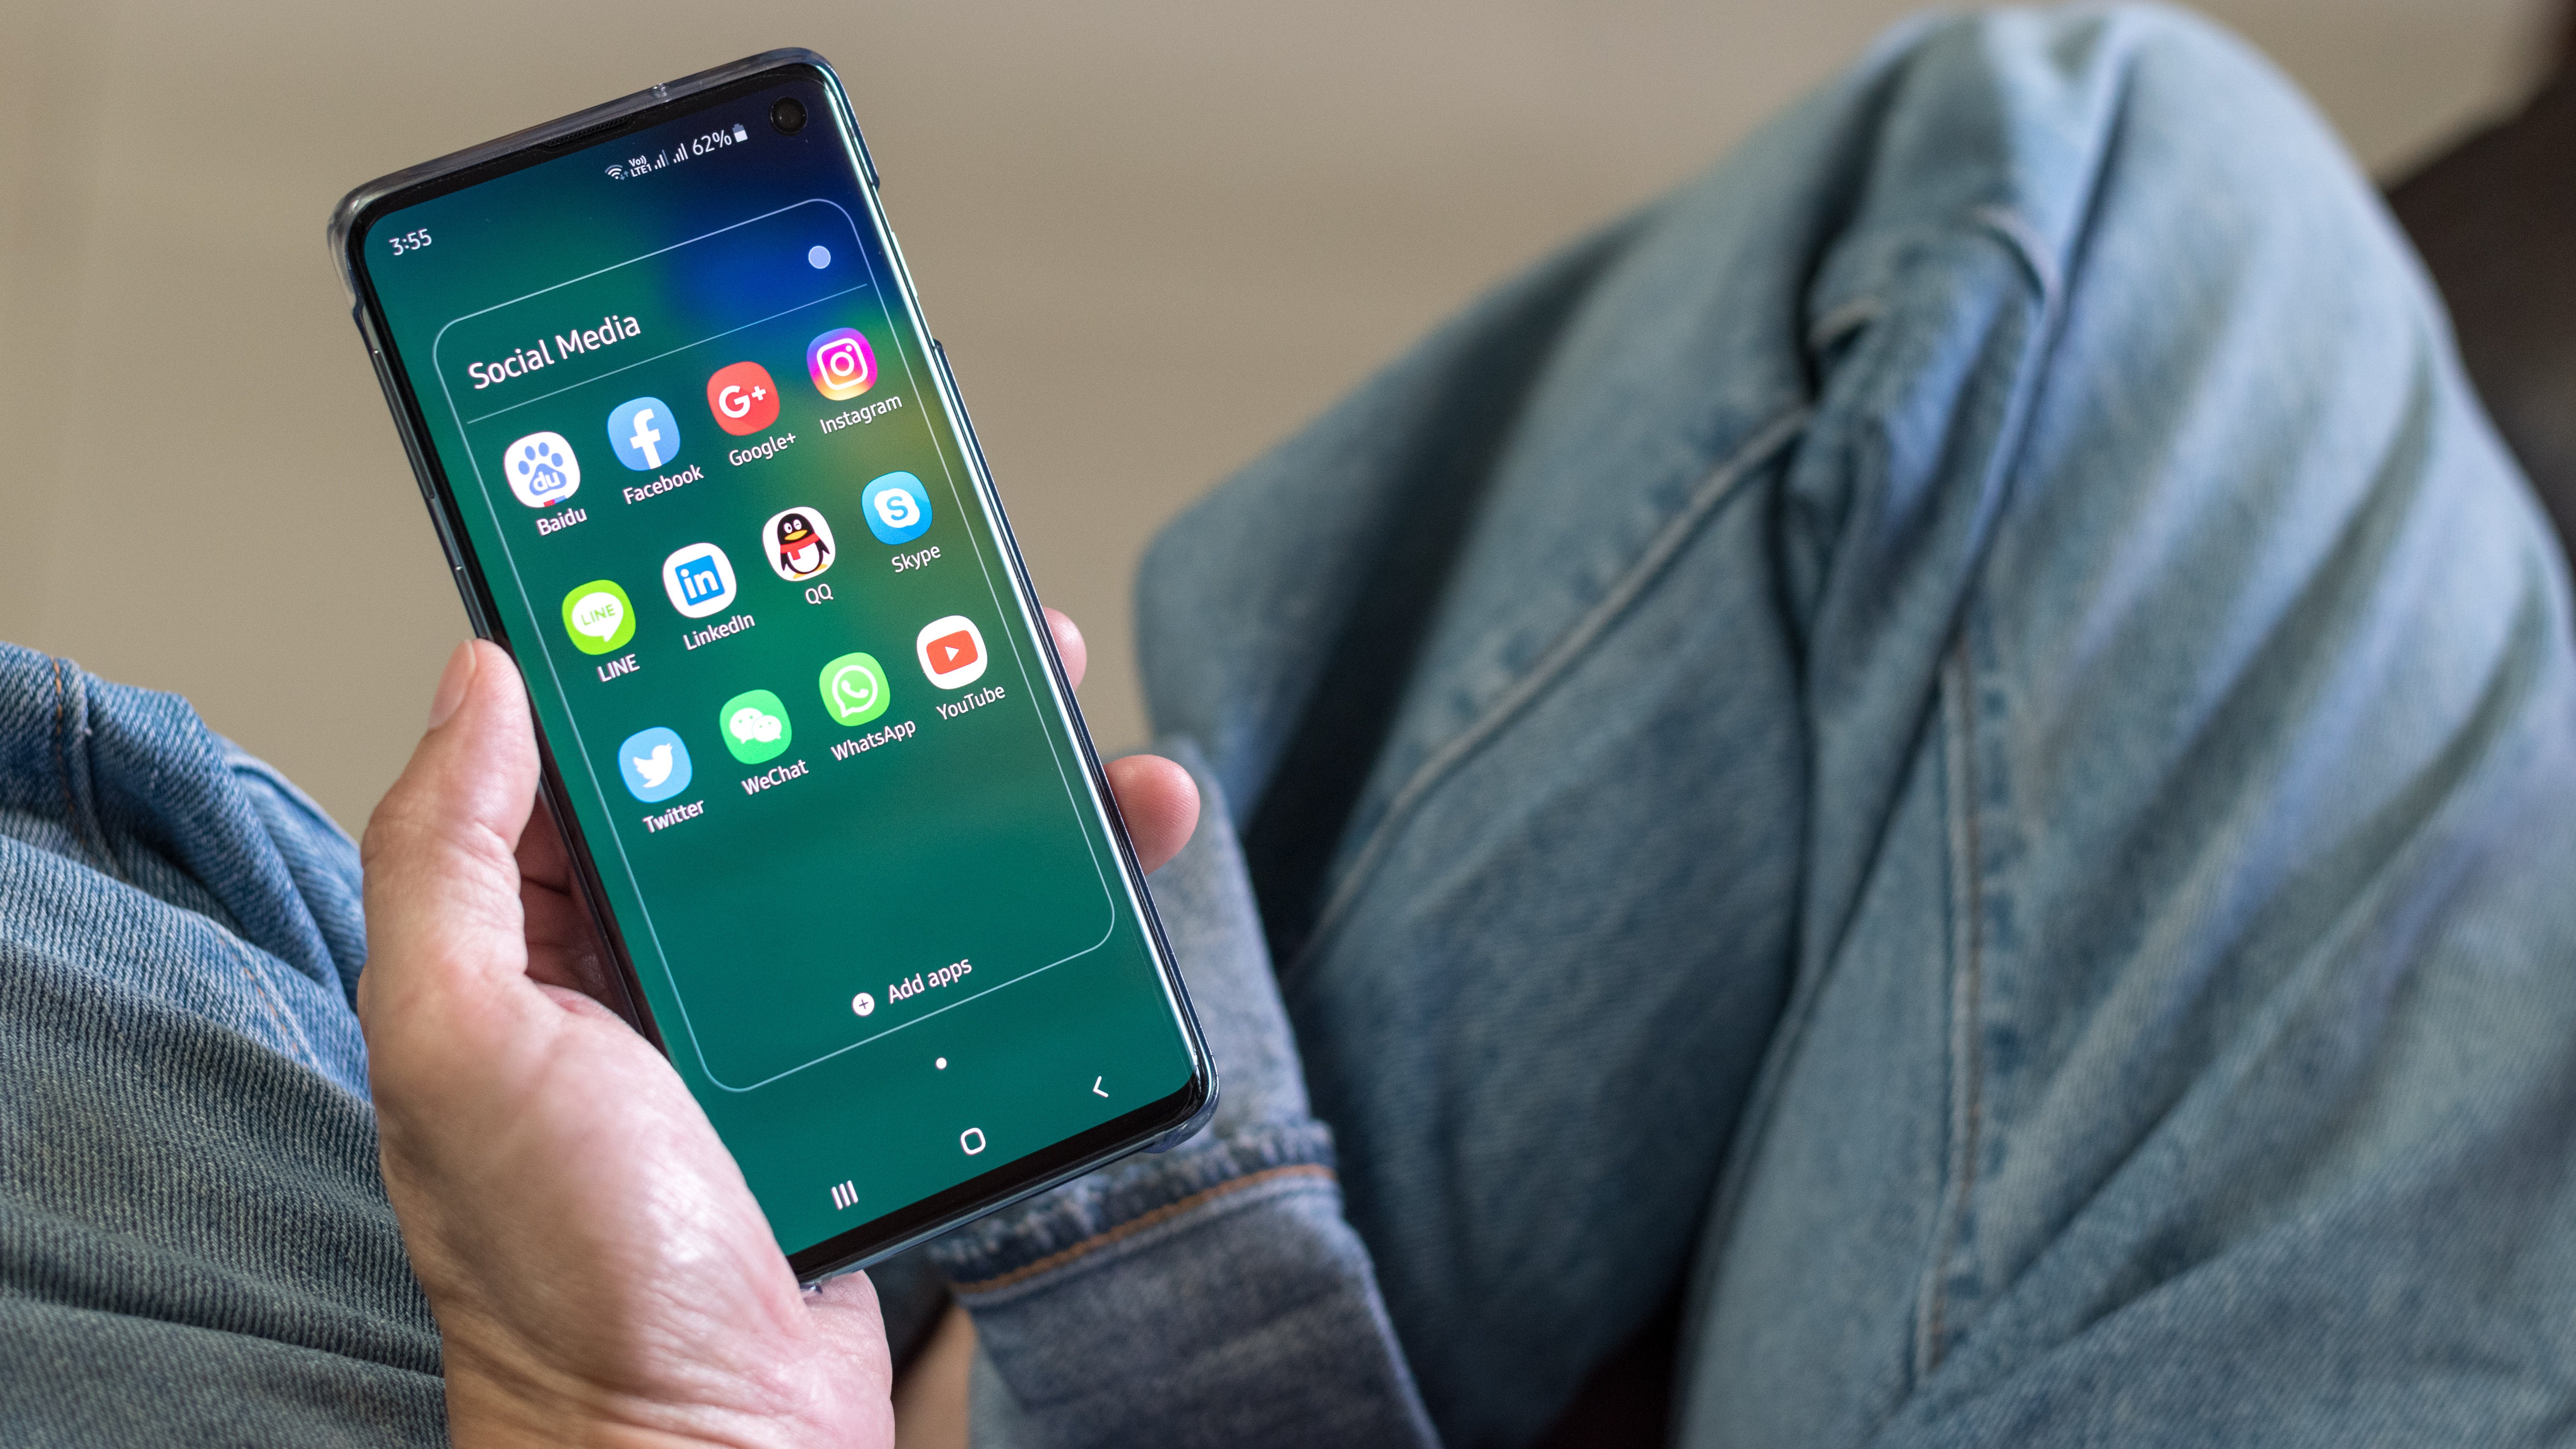 How To Get Android 10 On Your Samsung Galaxy S10